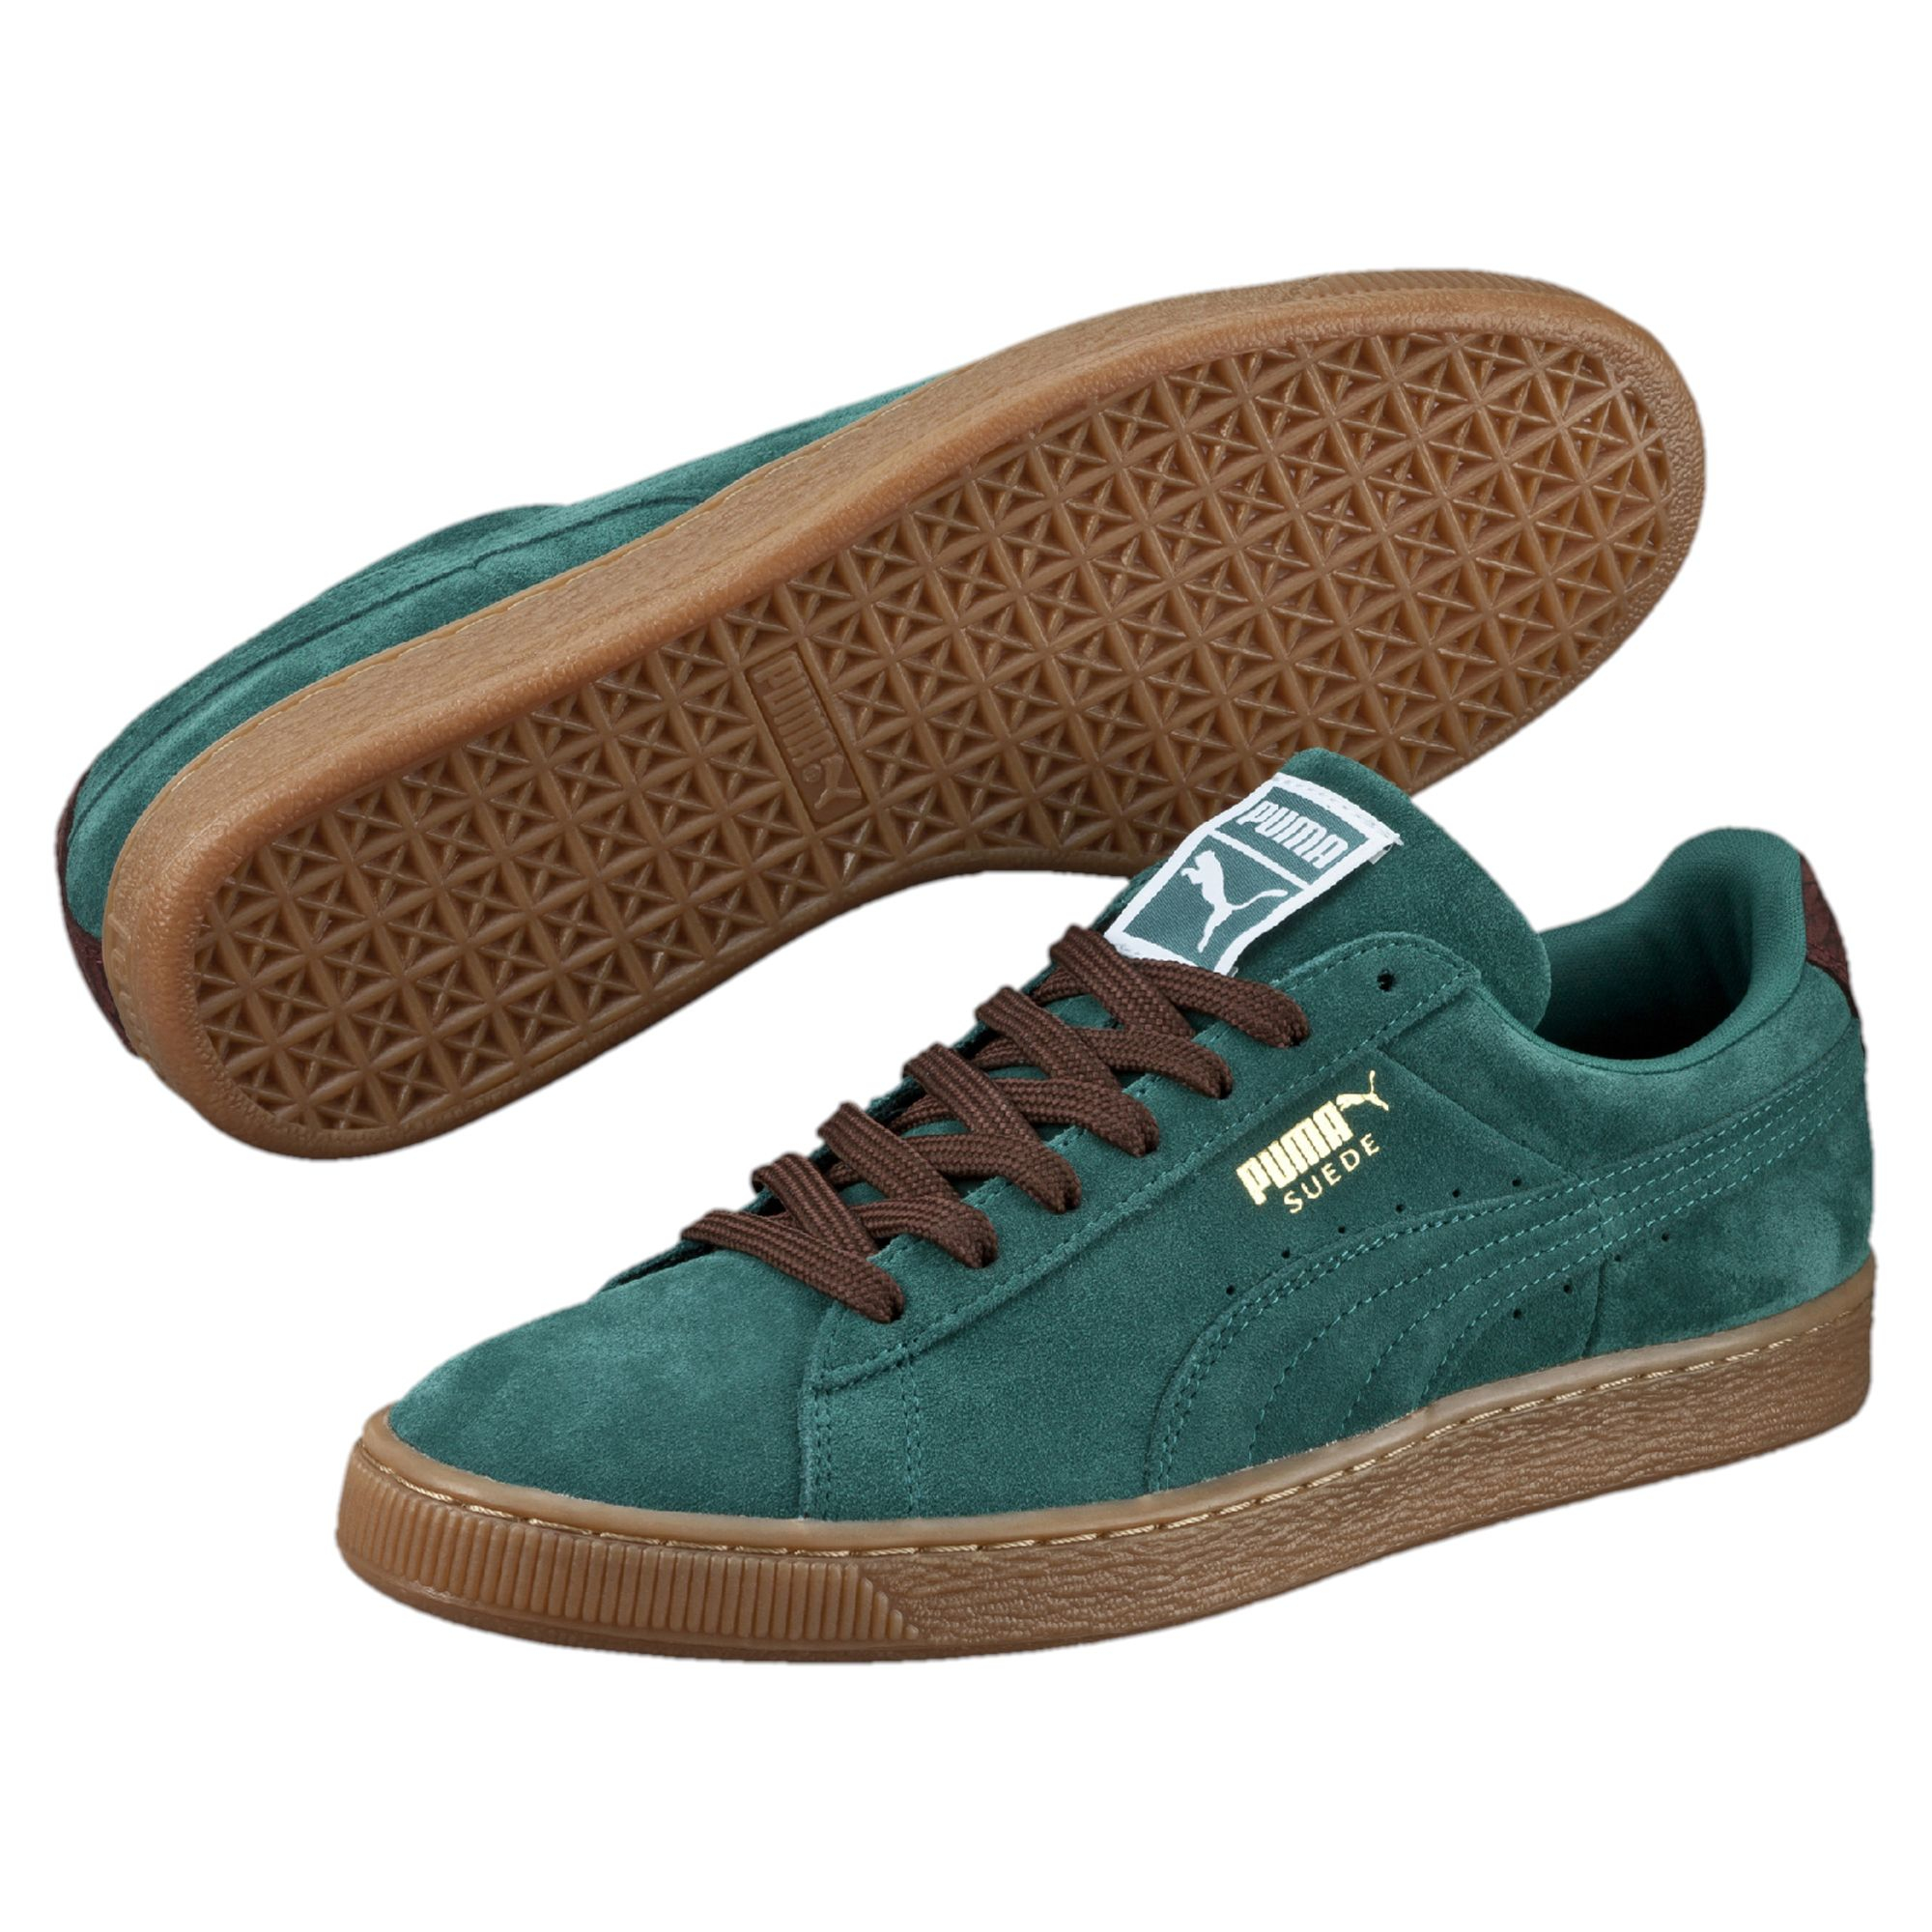 Lyst - PUMA Suede Classic Casual Men's Sneakers in Green for Men